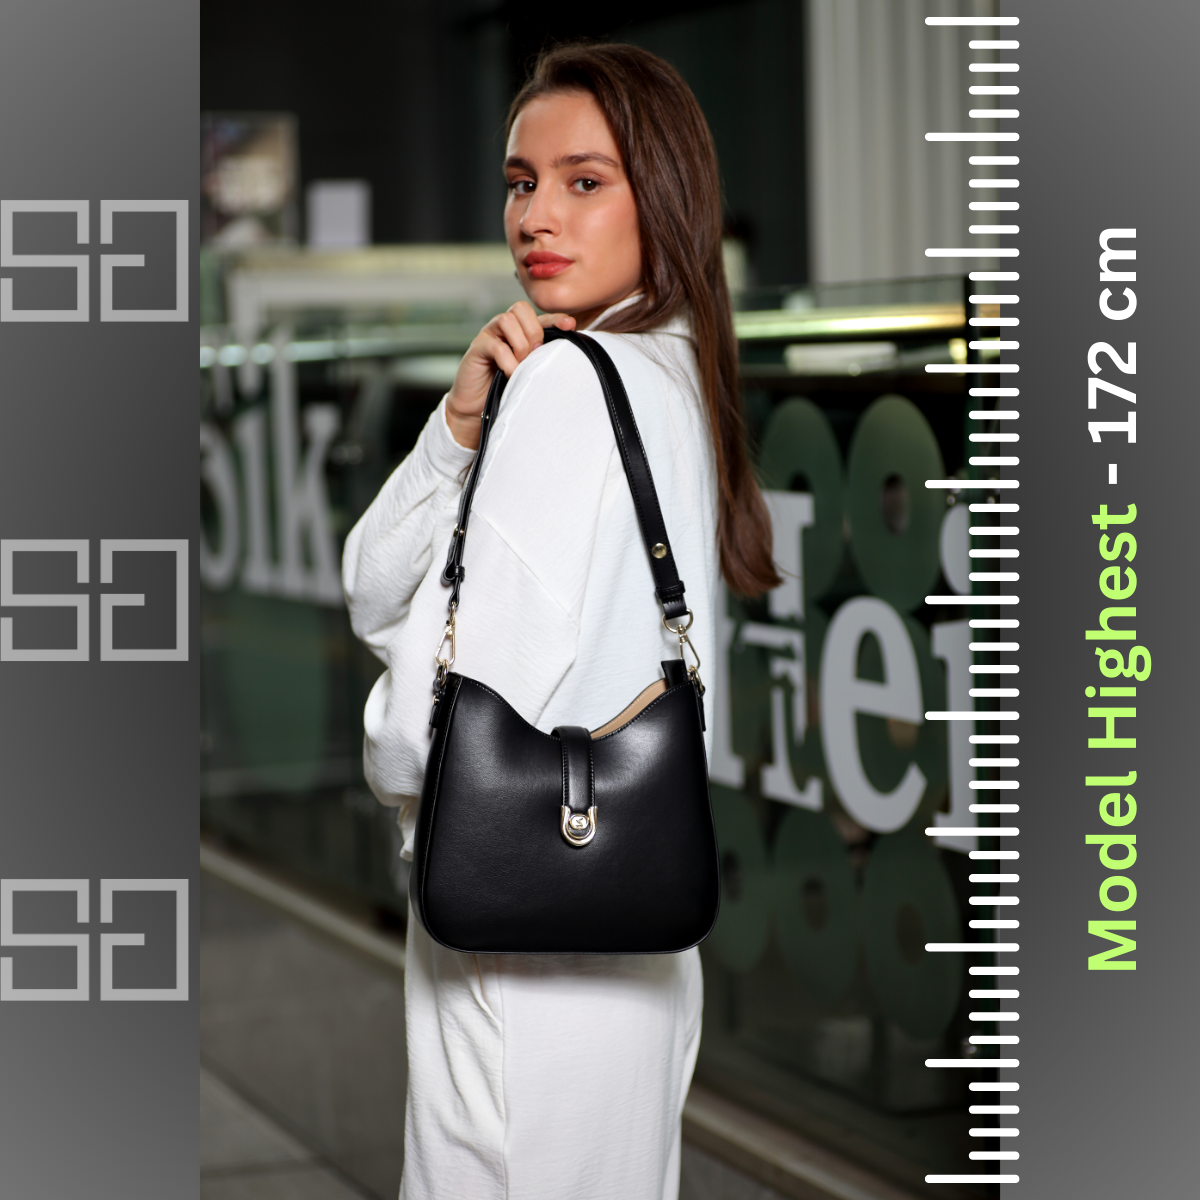 Bag made of 100% luxurious microfiber leather, width 24.5 cm, black color